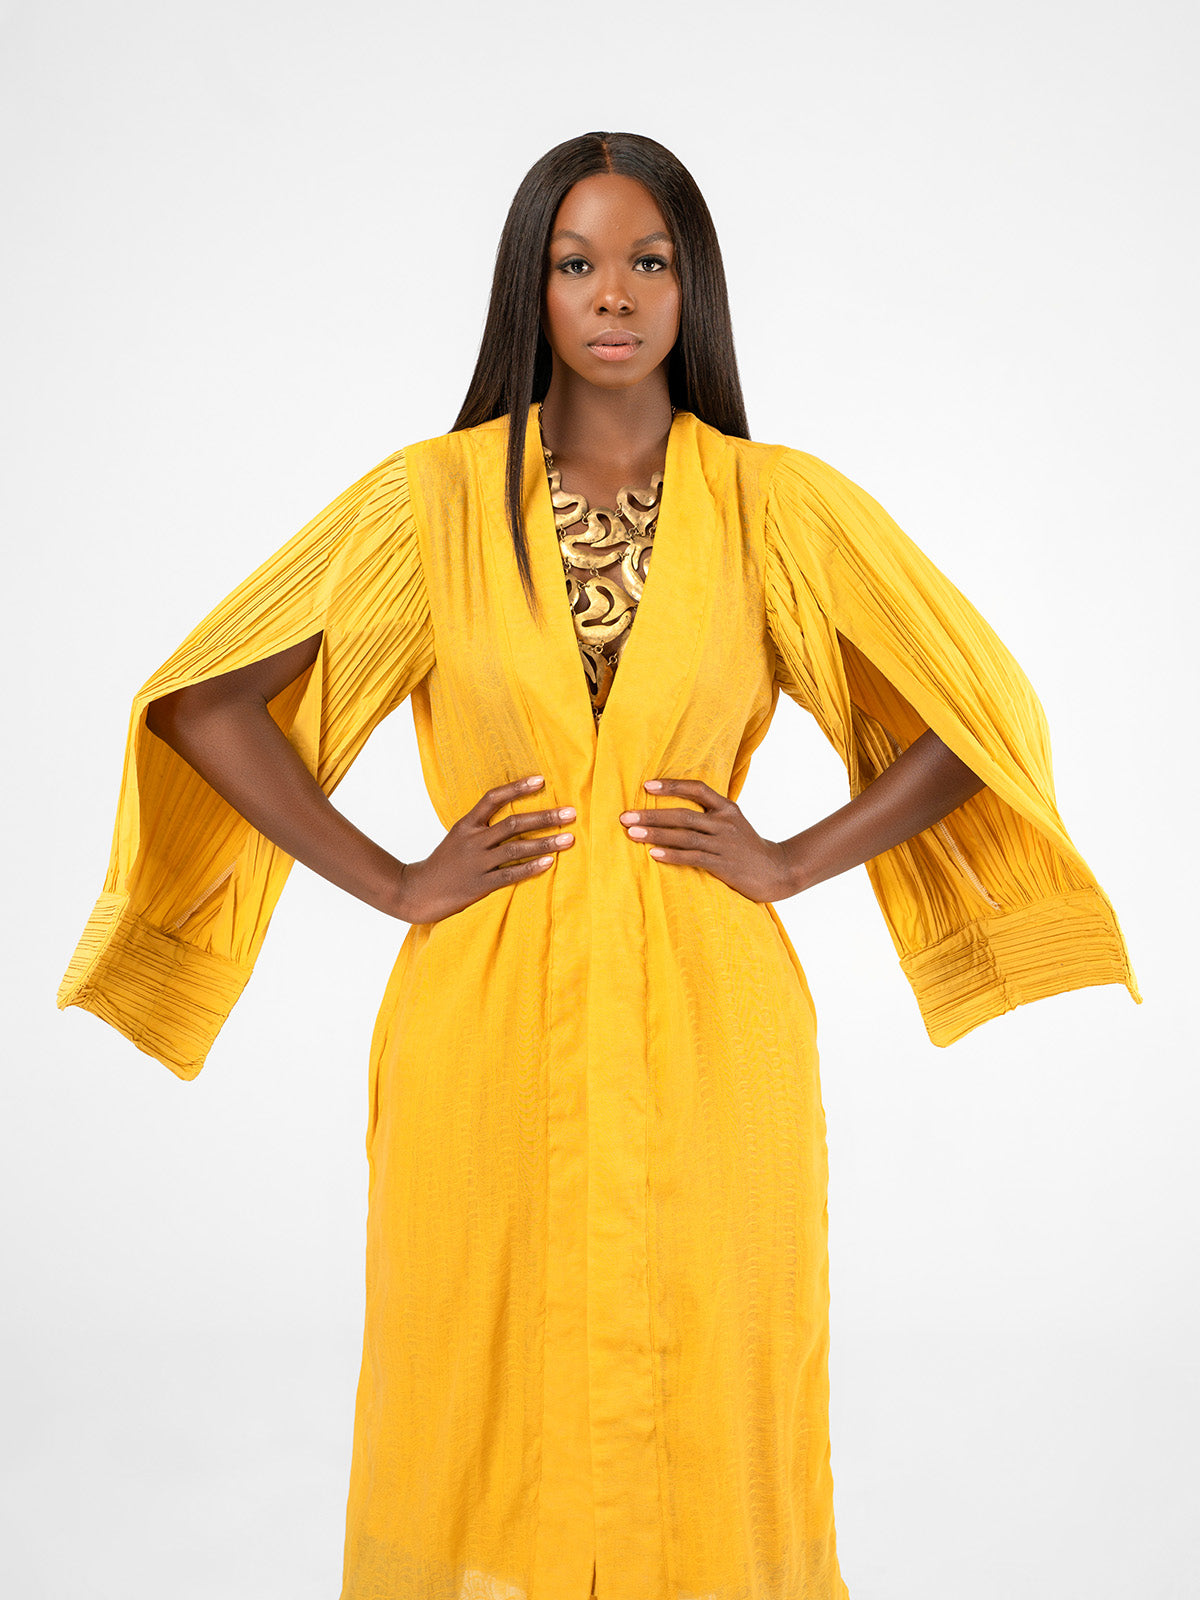 Pleated Yellow Duster Jacket